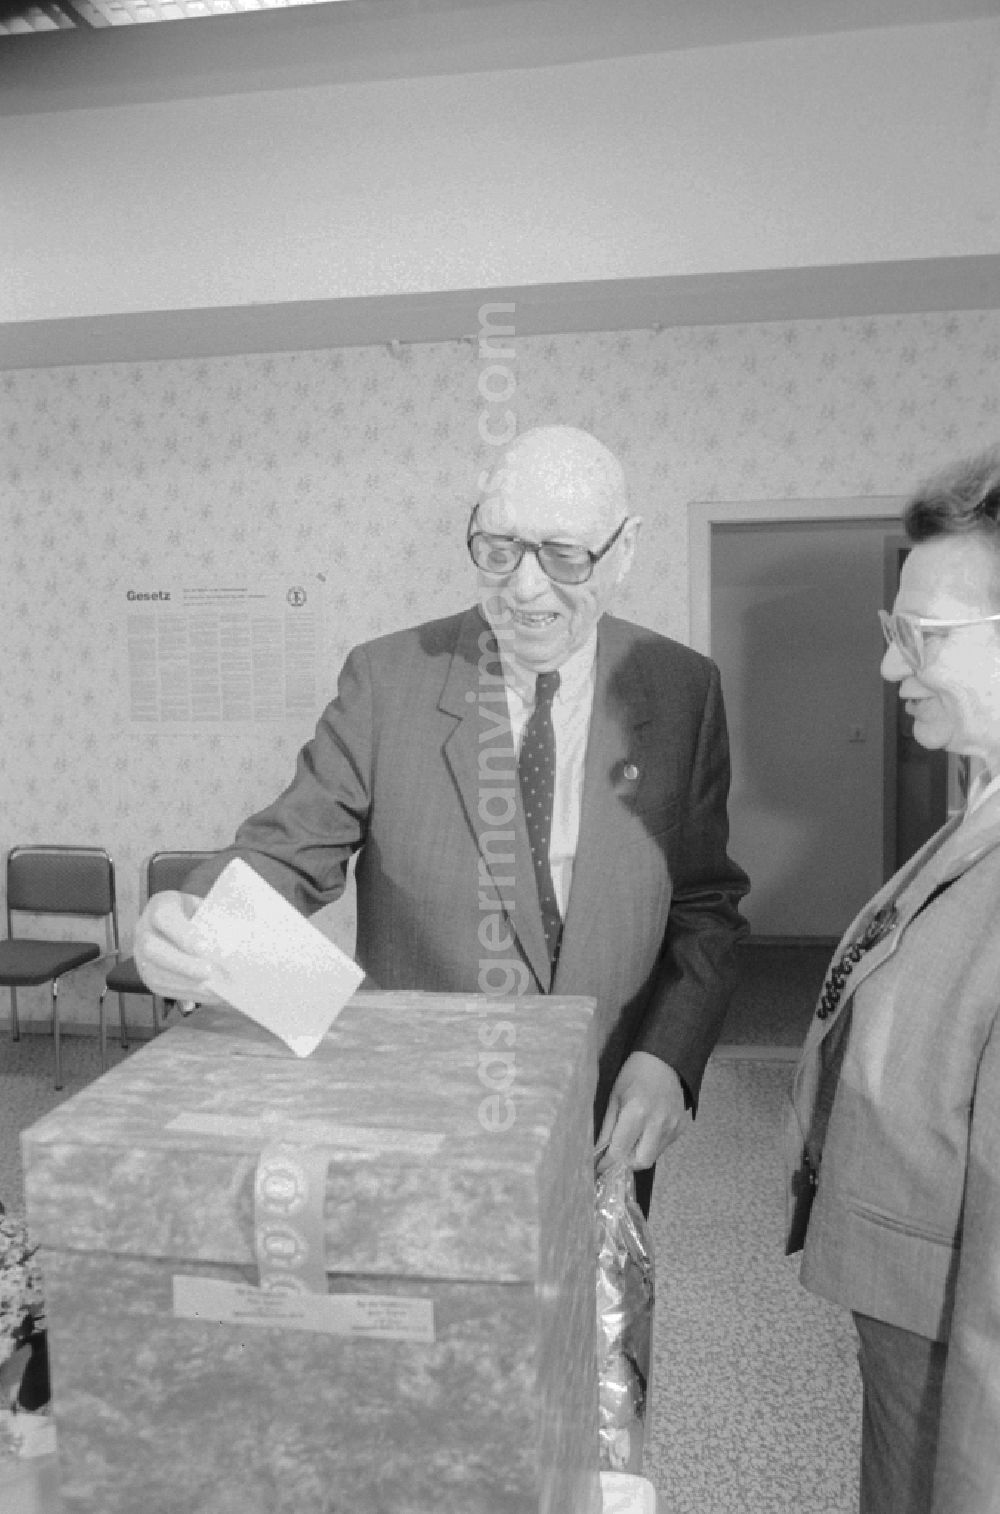 GDR image archive: Berlin - Heinrich Hohmann, president of NDPD in the voting at the ballot box for the local elections in the GDR in Berlin